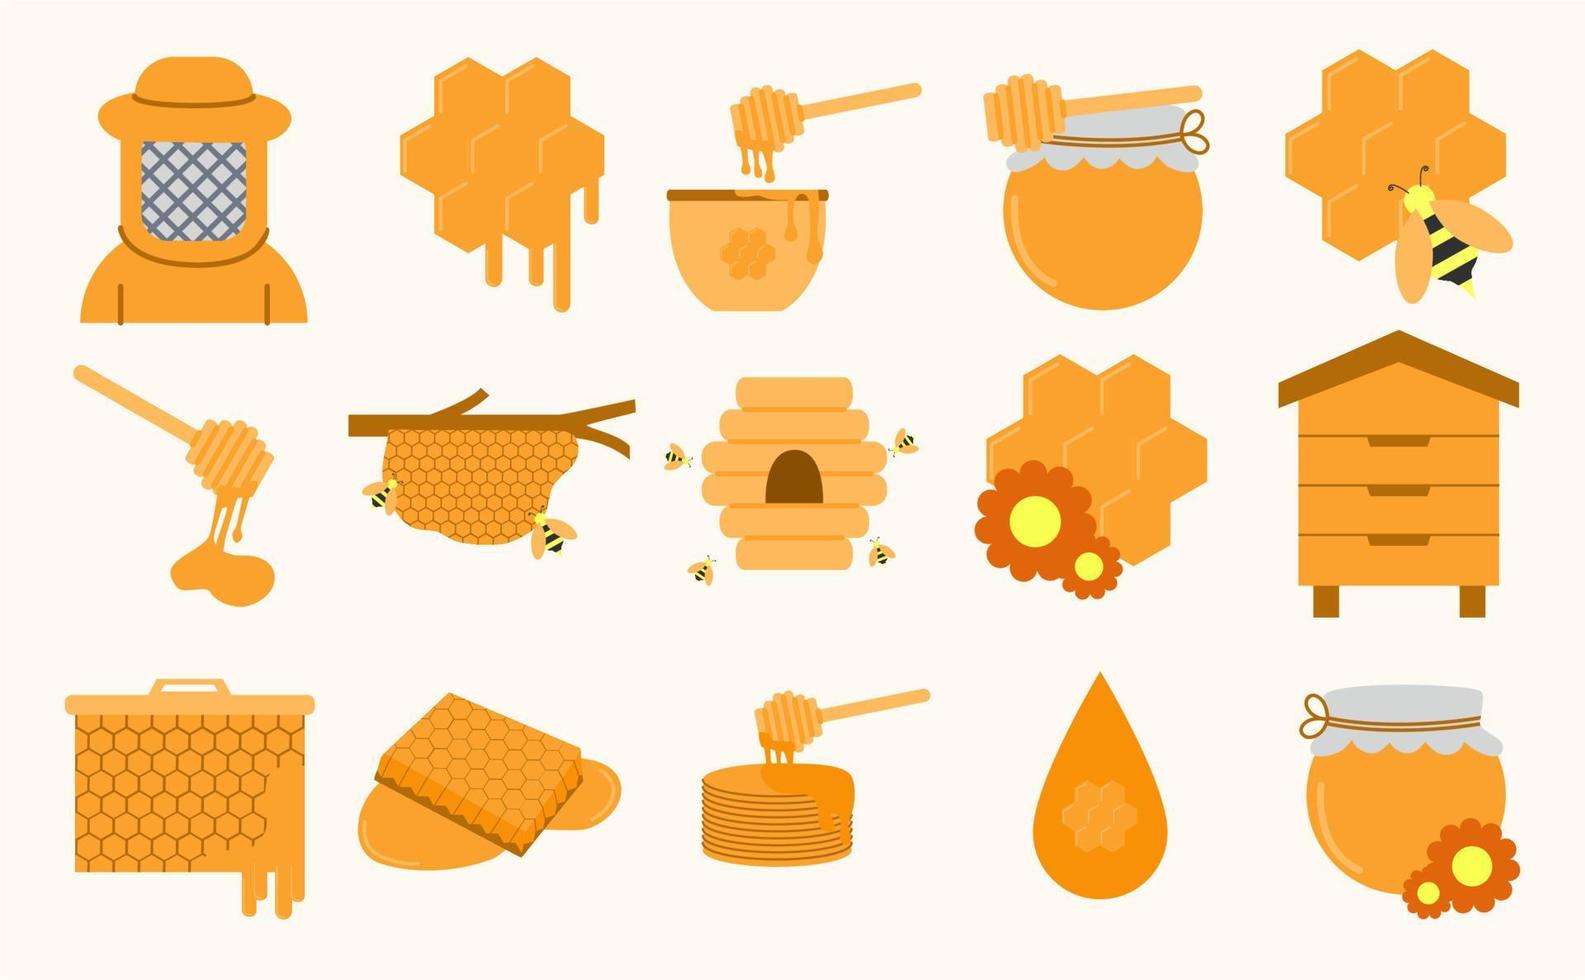 Honey and bee icons set. Collection of flat icons such as, honey, bee, beehive, honeycomb, beeswax, beekeeper, bee nest, honey spoon and others vector